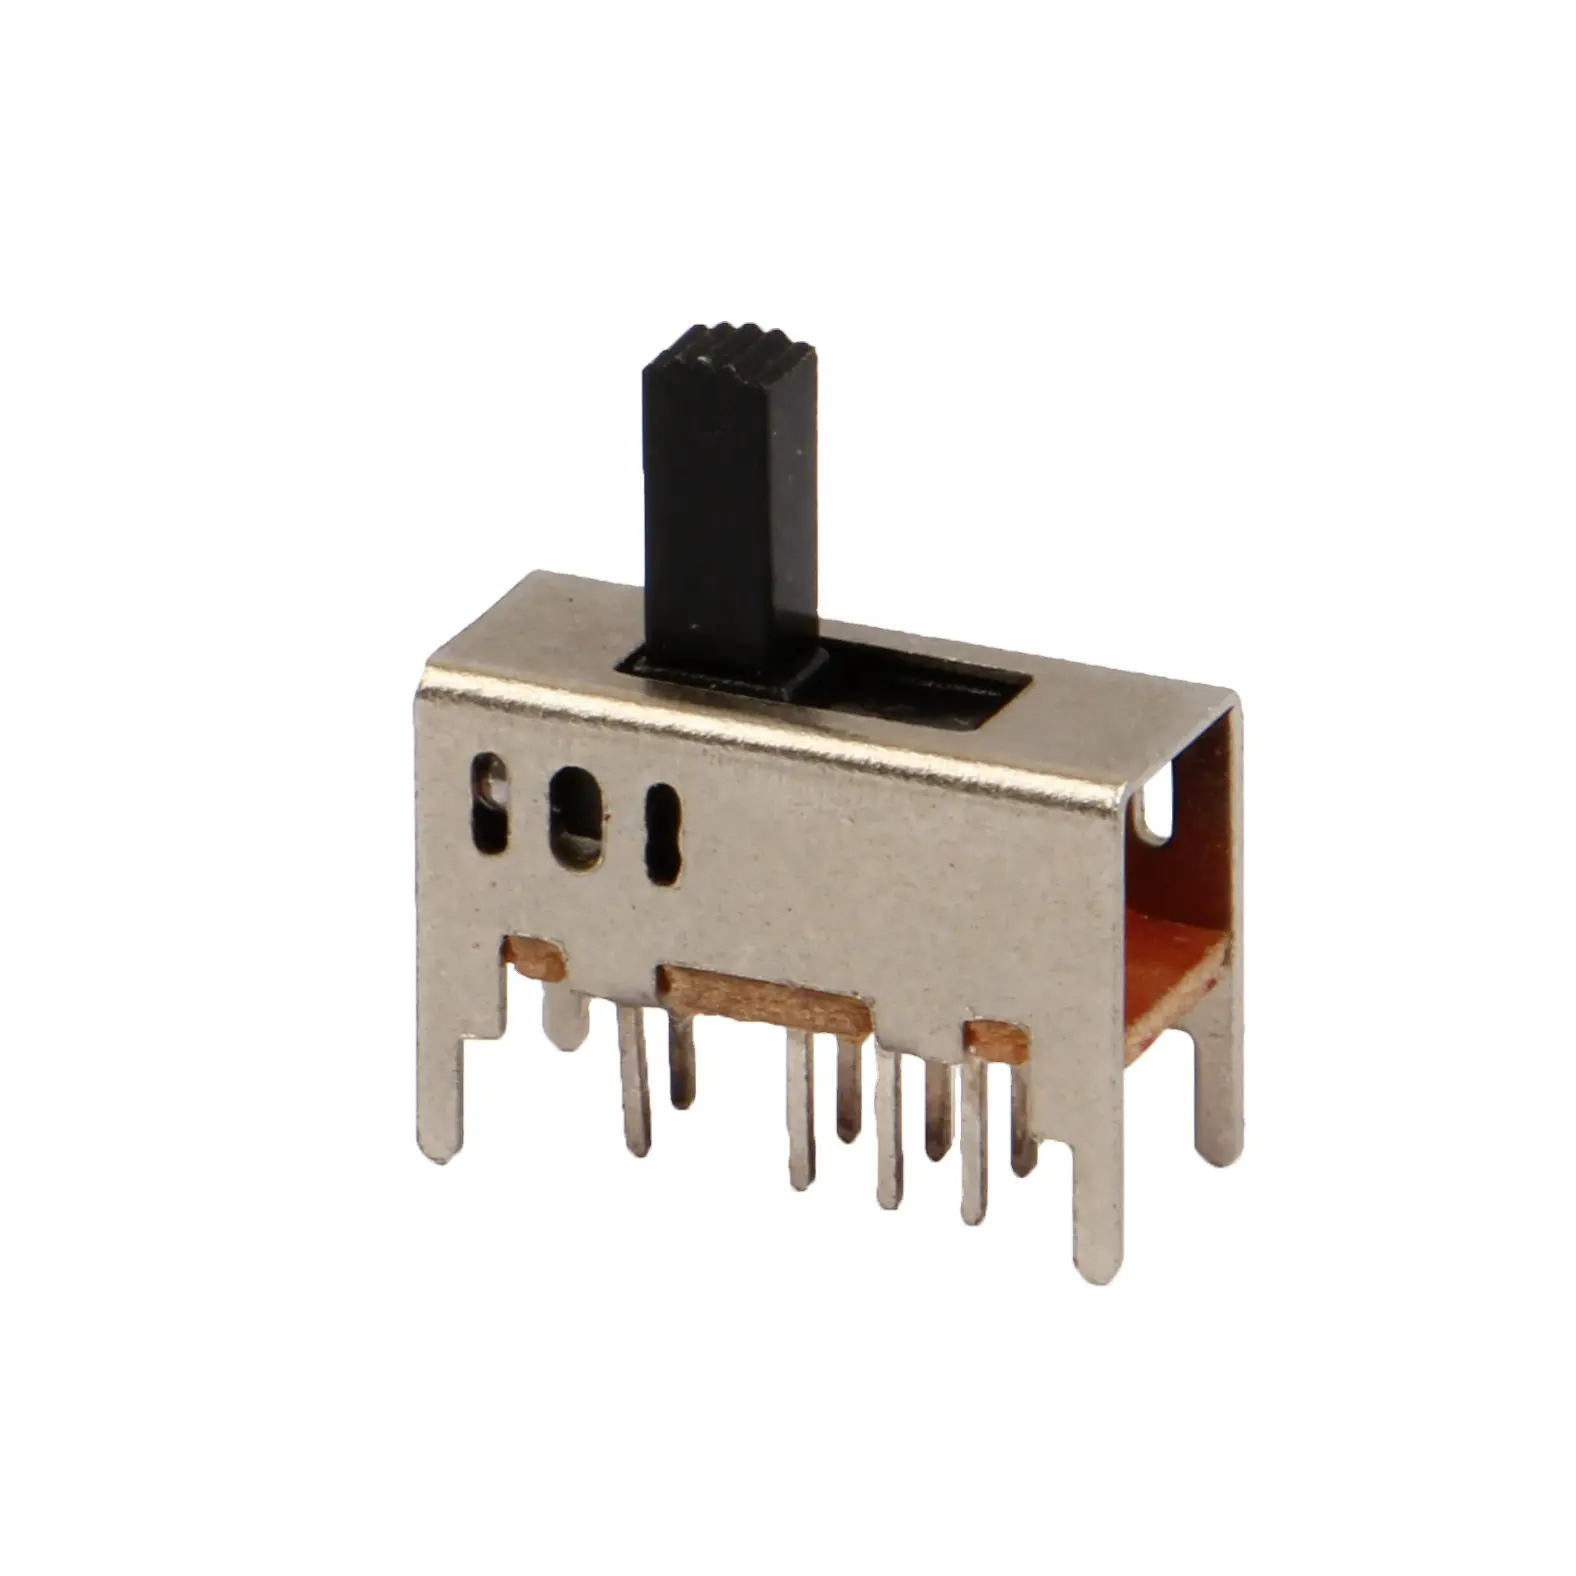 SS-23D03 2P3T Double pole three throw 3 position slide switch 8 solder lug pin vertical type with 4 fixed pins